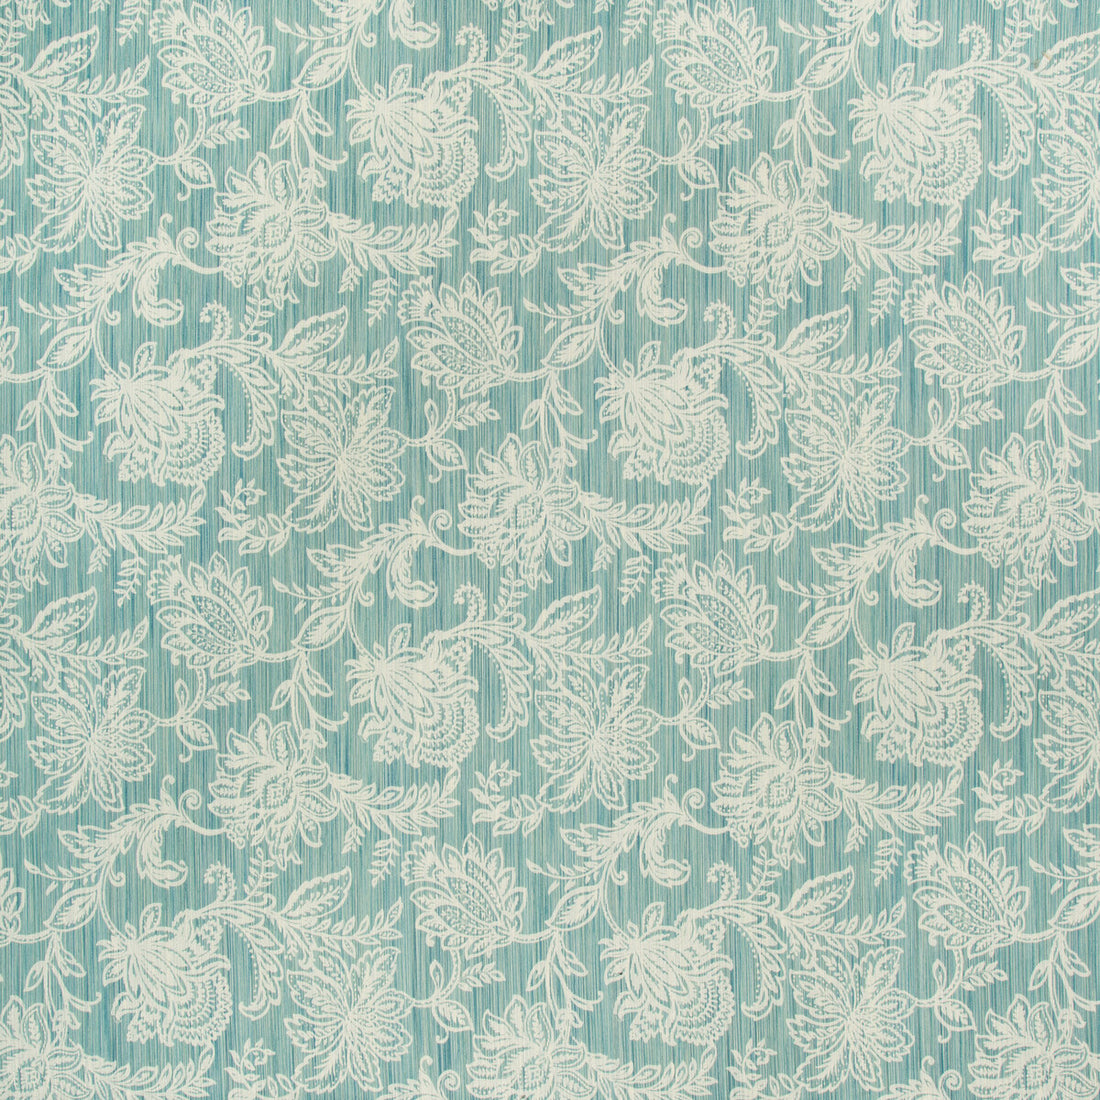 Kravet Contract fabric in 34754-1615 color - pattern 34754.1615.0 - by Kravet Contract in the Incase Crypton Gis collection